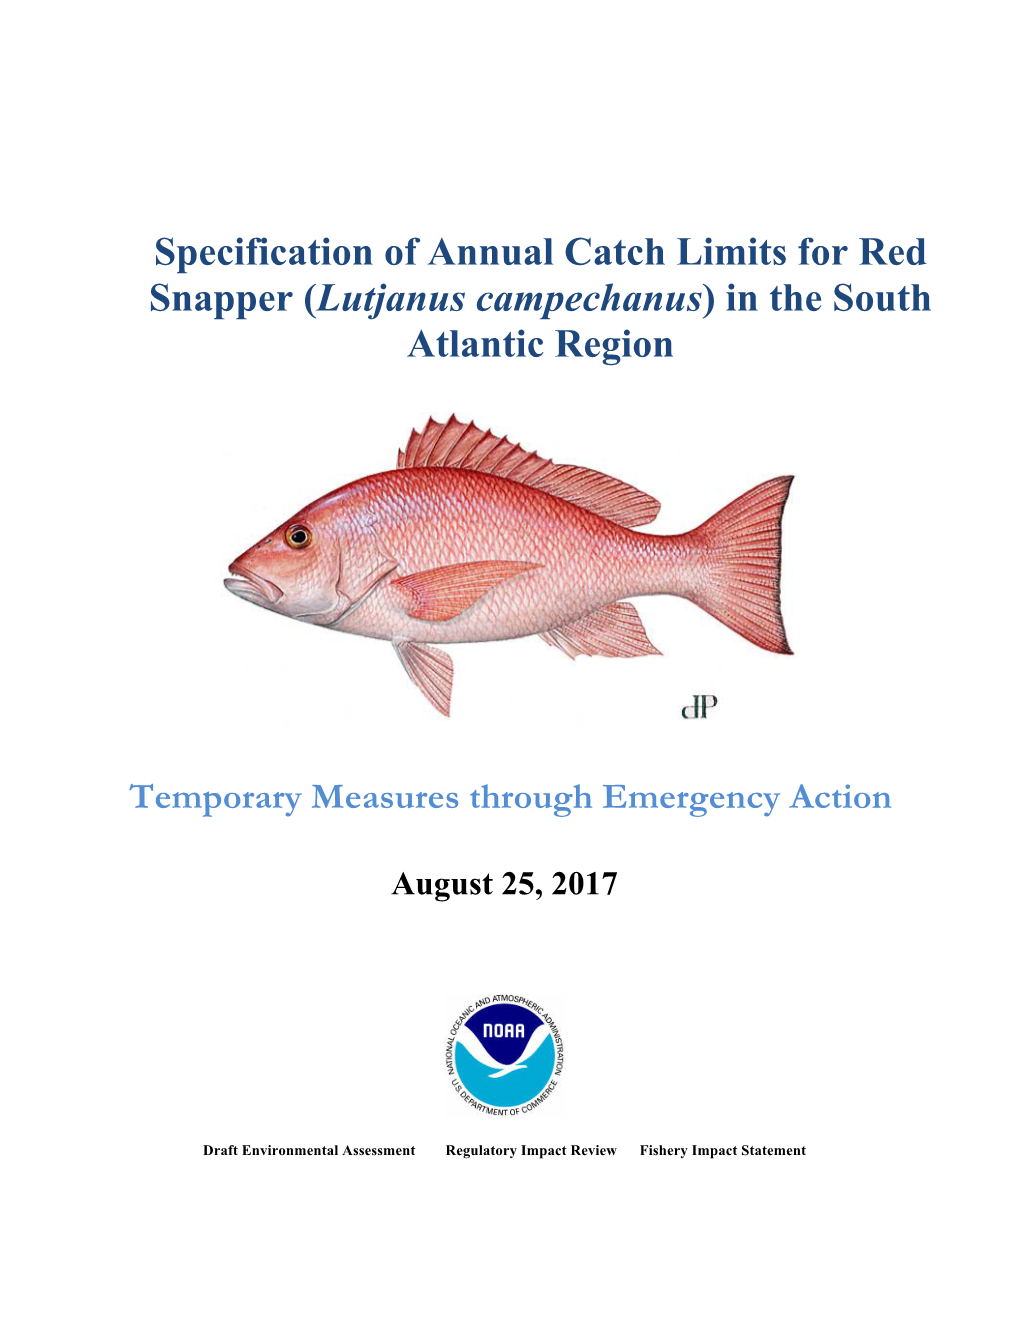 Specification of Annual Catch Limits for Red Snapper (Lutjanus Campechanus) in the South Atlantic Region